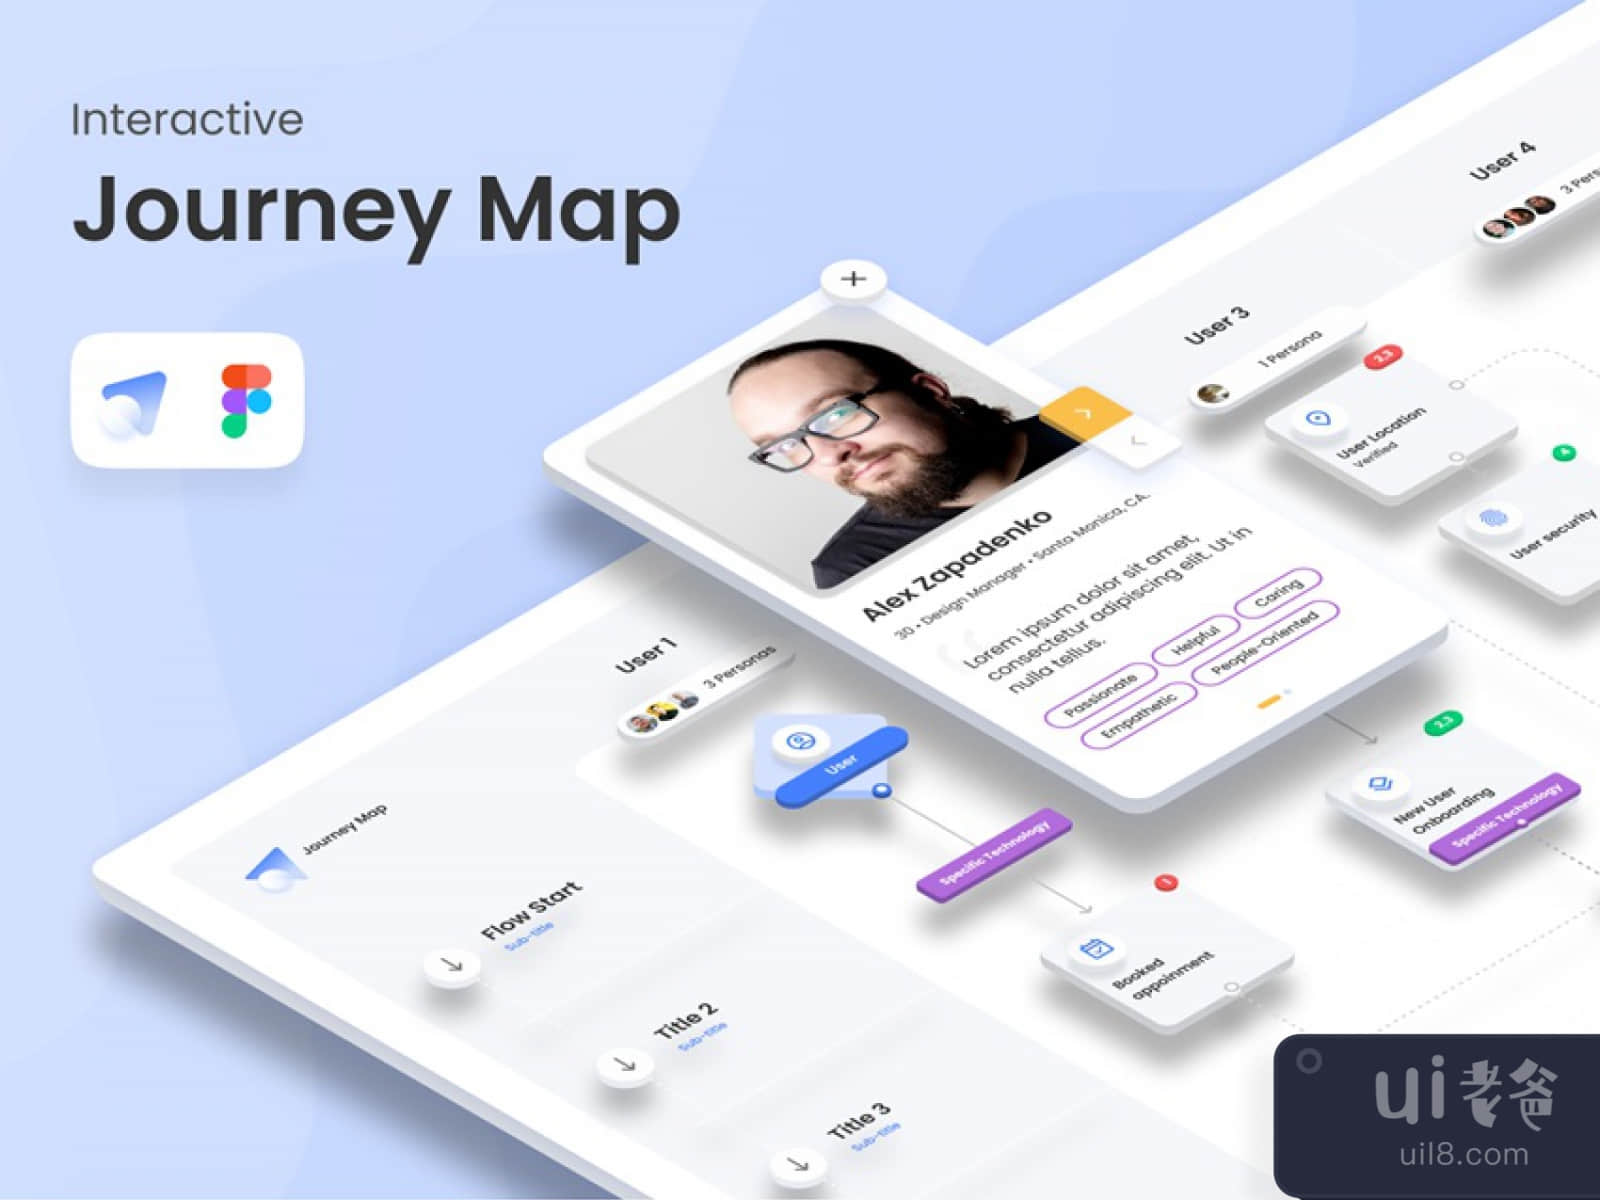 Interactive Journey Map for Figma and Adobe XD No 1